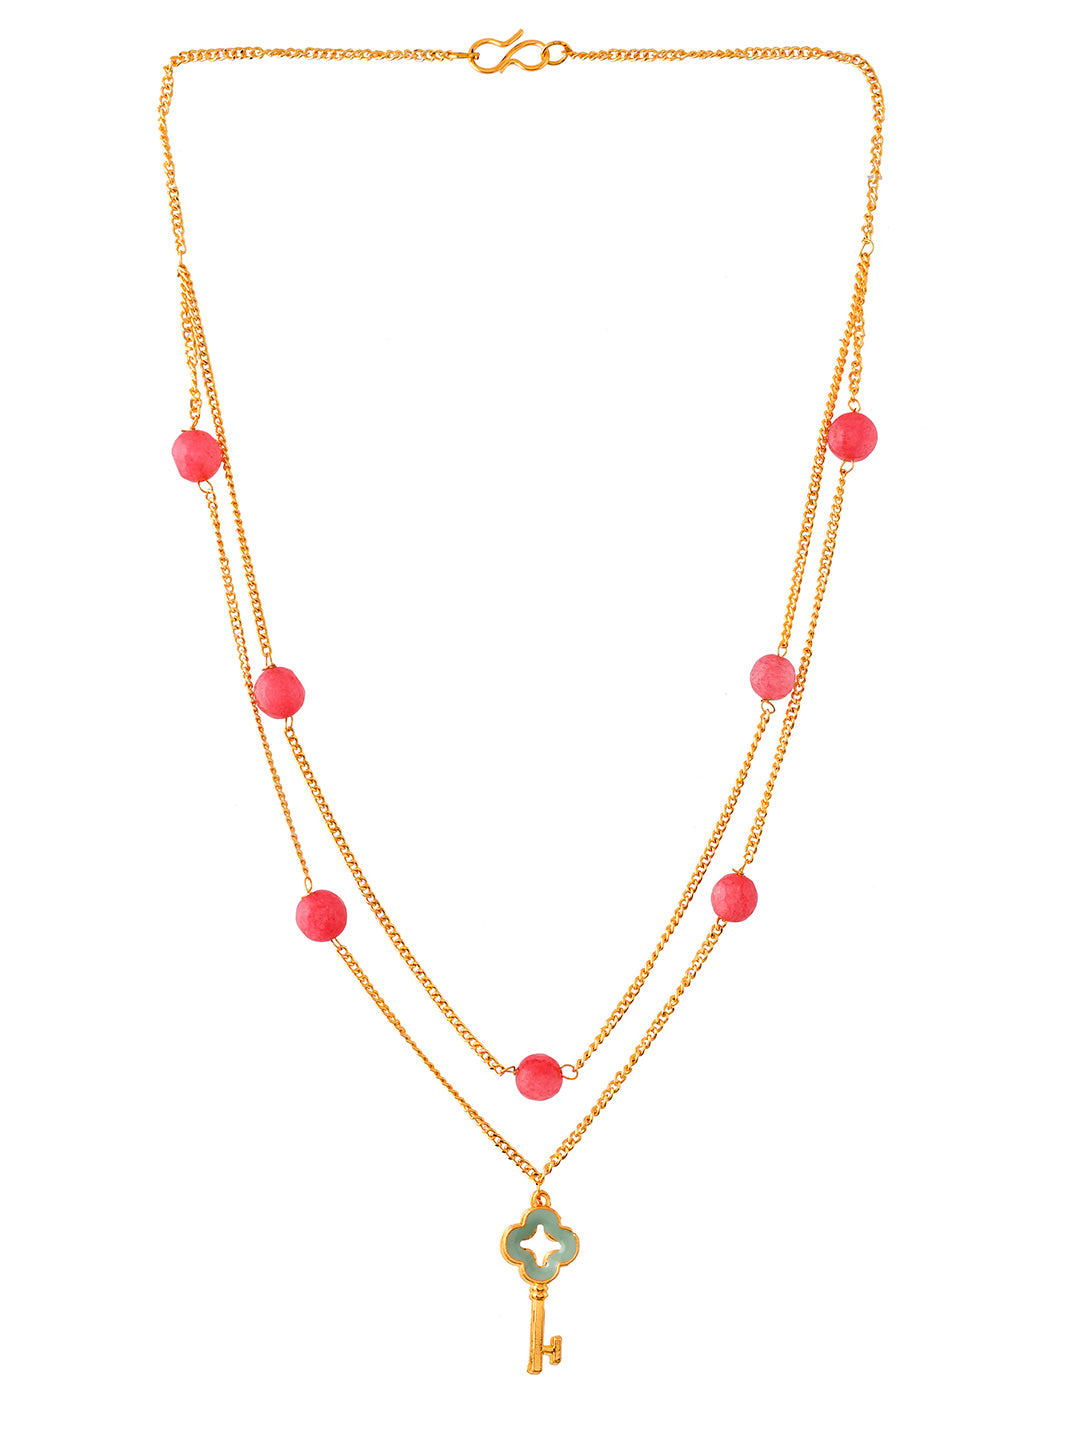 Gold Plated Chain necklace Set